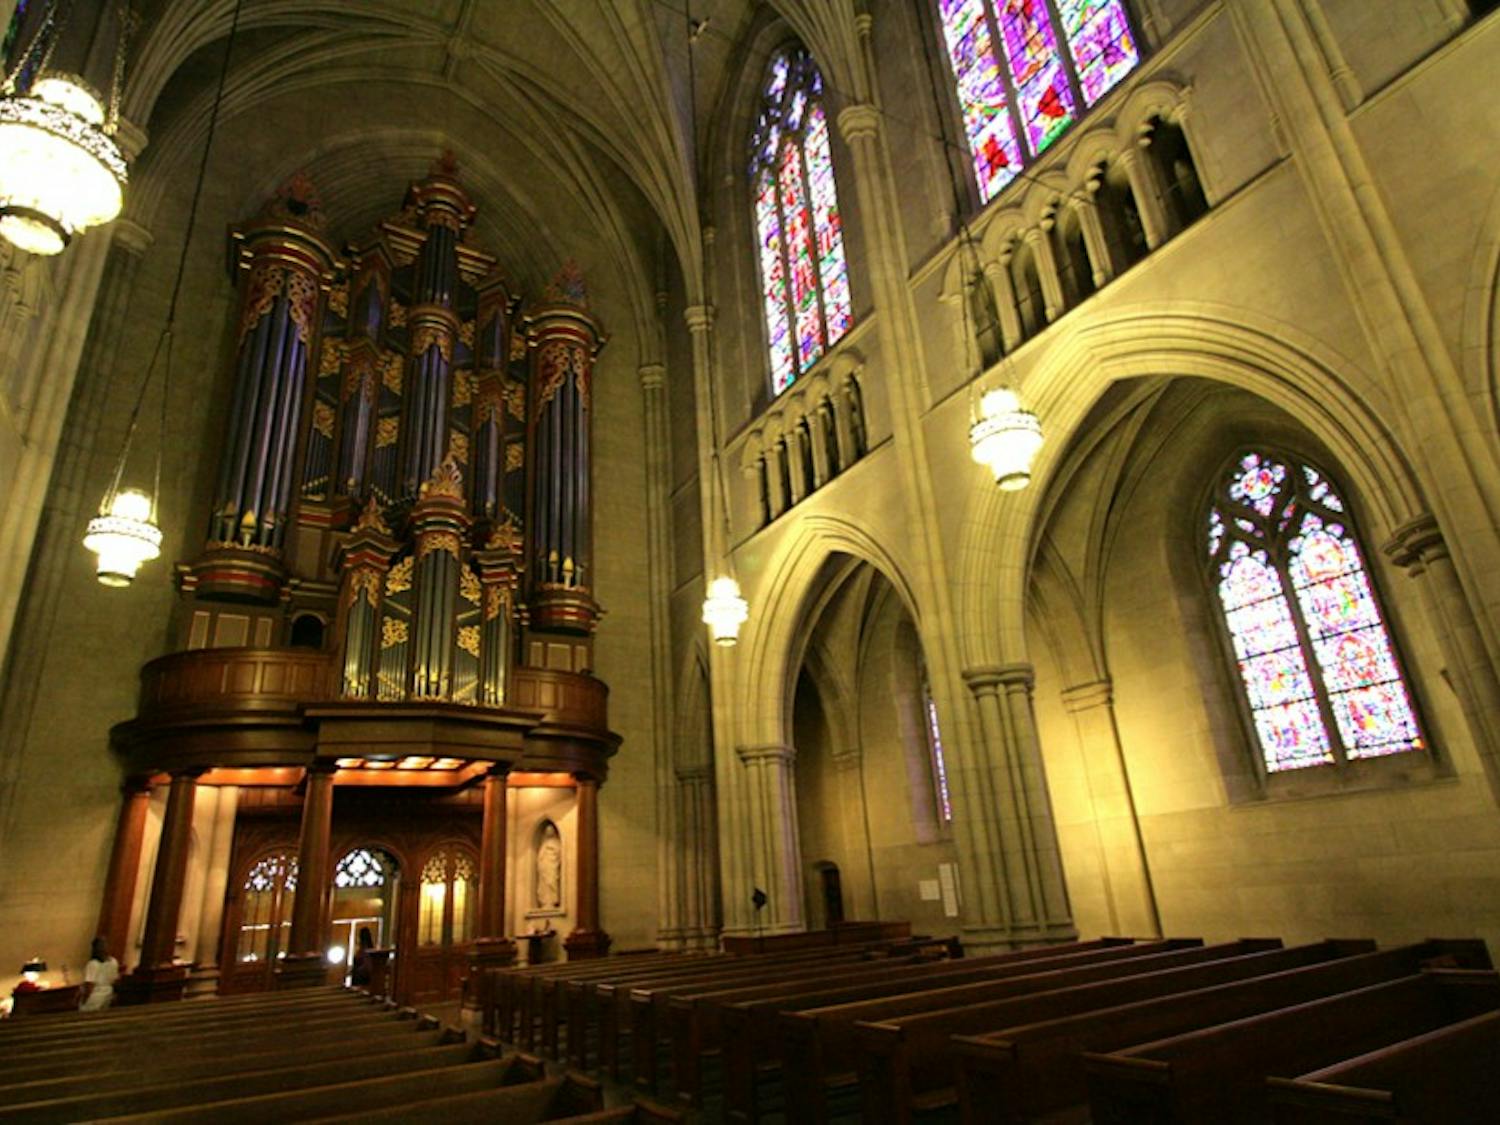 Duke Chapel boasts three pipe organs, which are played casually for the public between 12:30 and 1:30 p.m. on Mondays through Thursdays during the academic year.